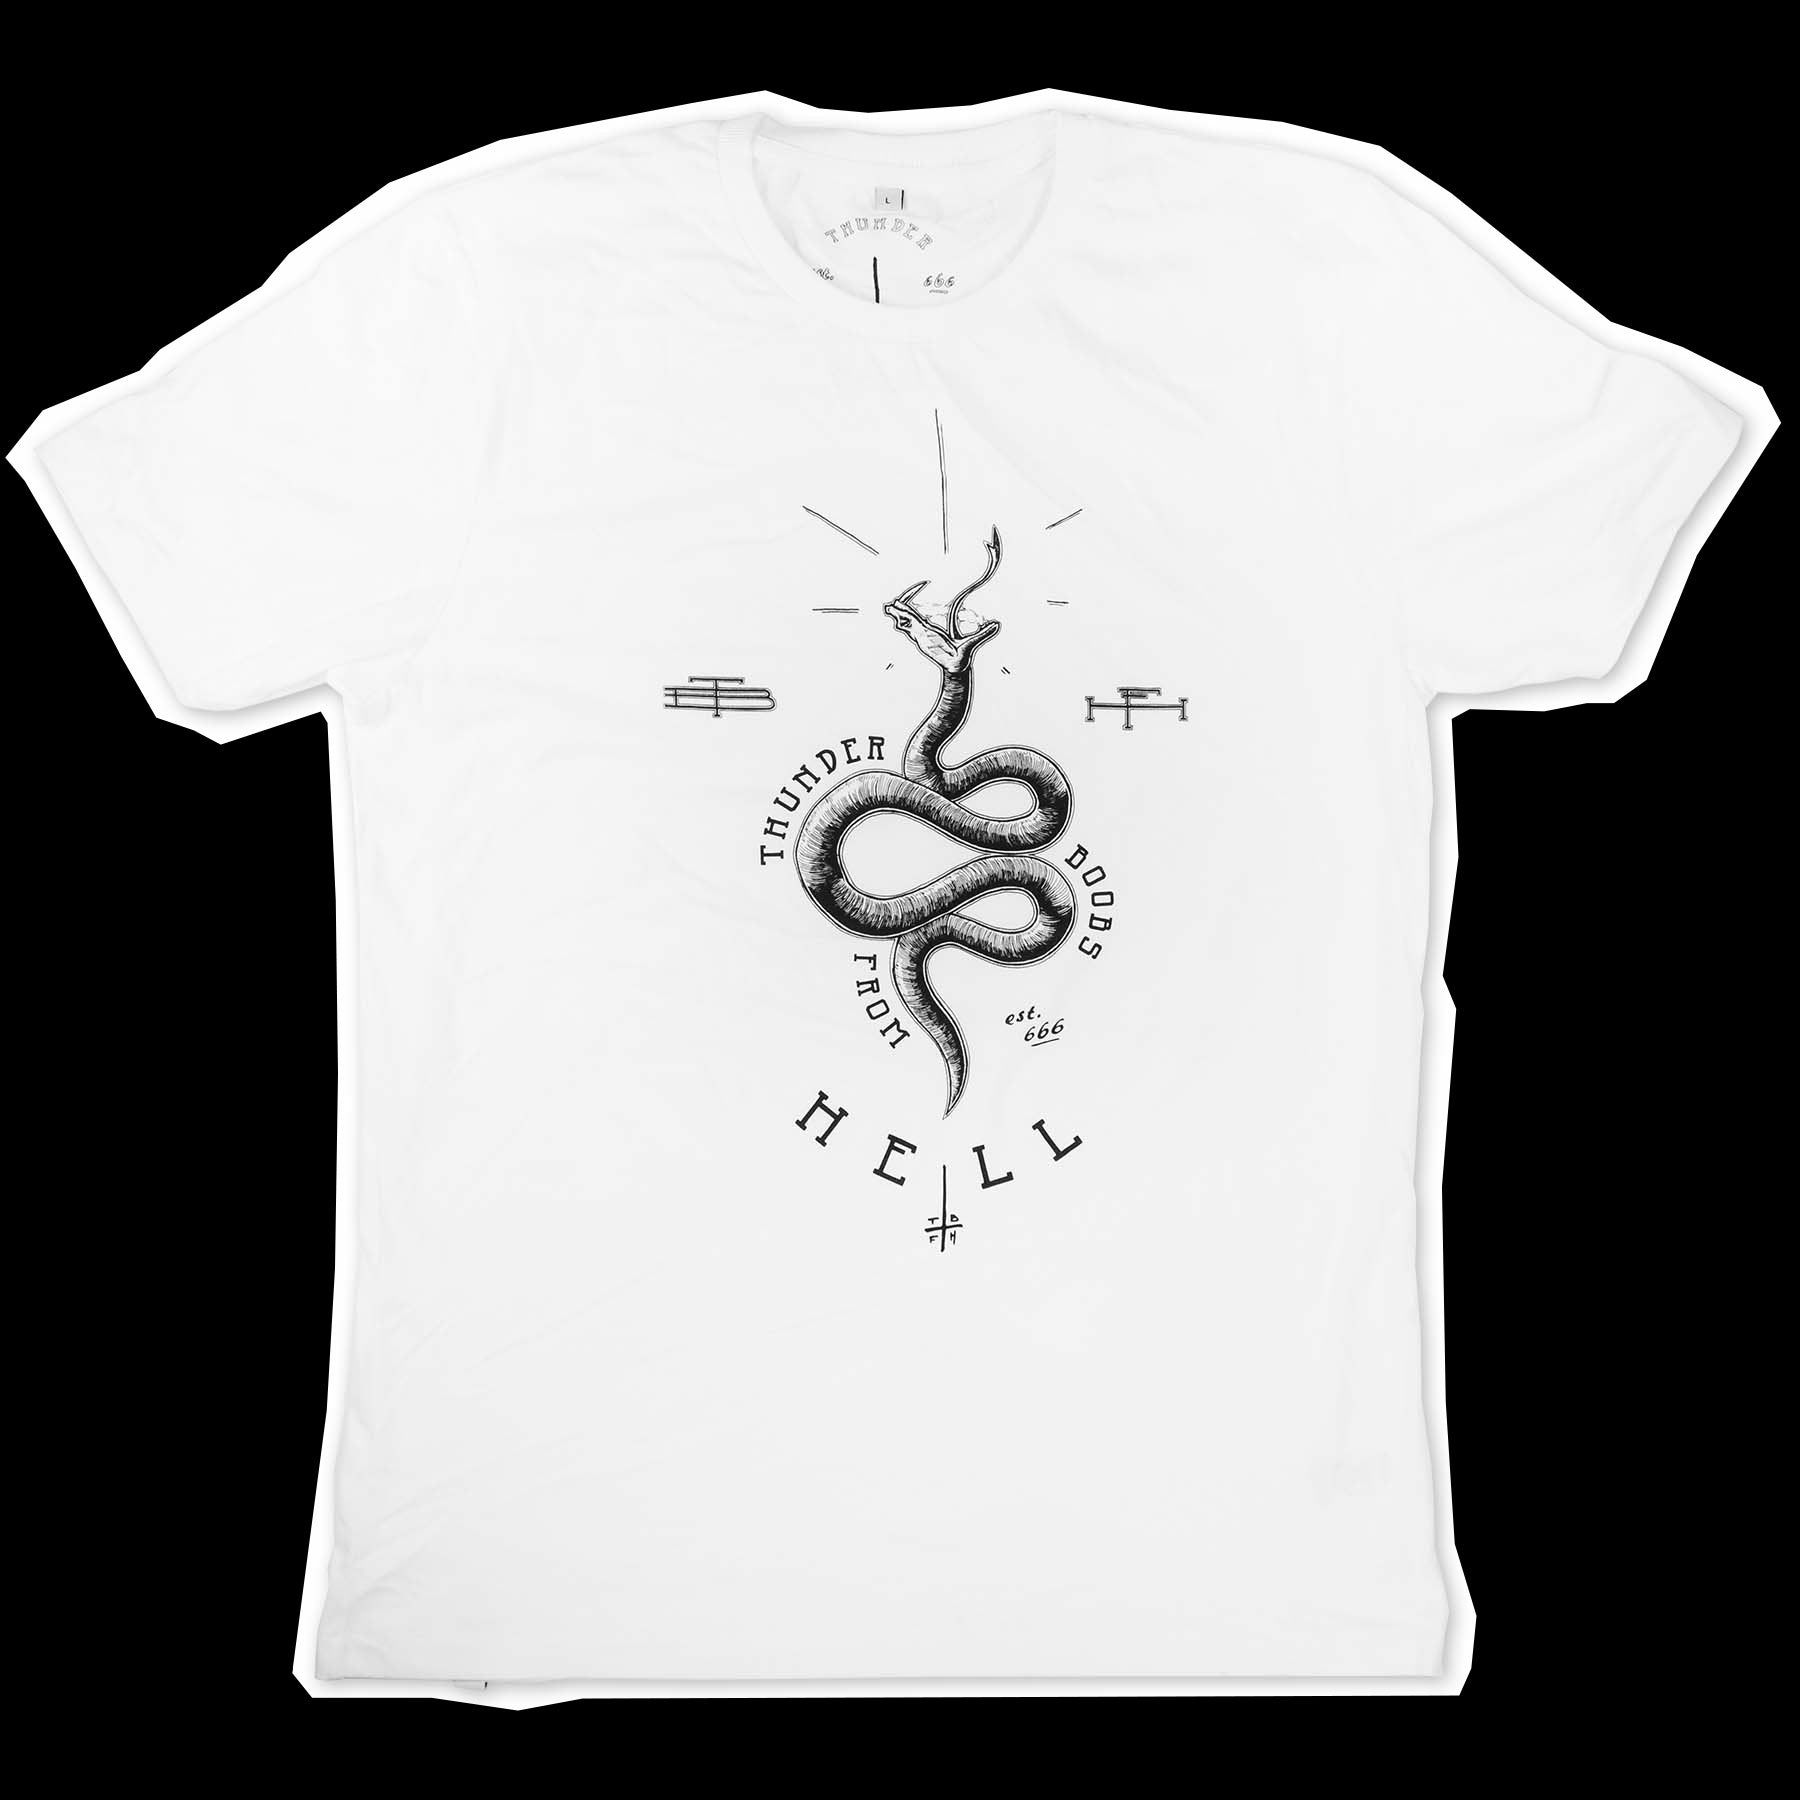 White t-shirt with a black illustration of a snake , screen-printed on the left side chest. The text says "thunder boobs from hell and est. 666"